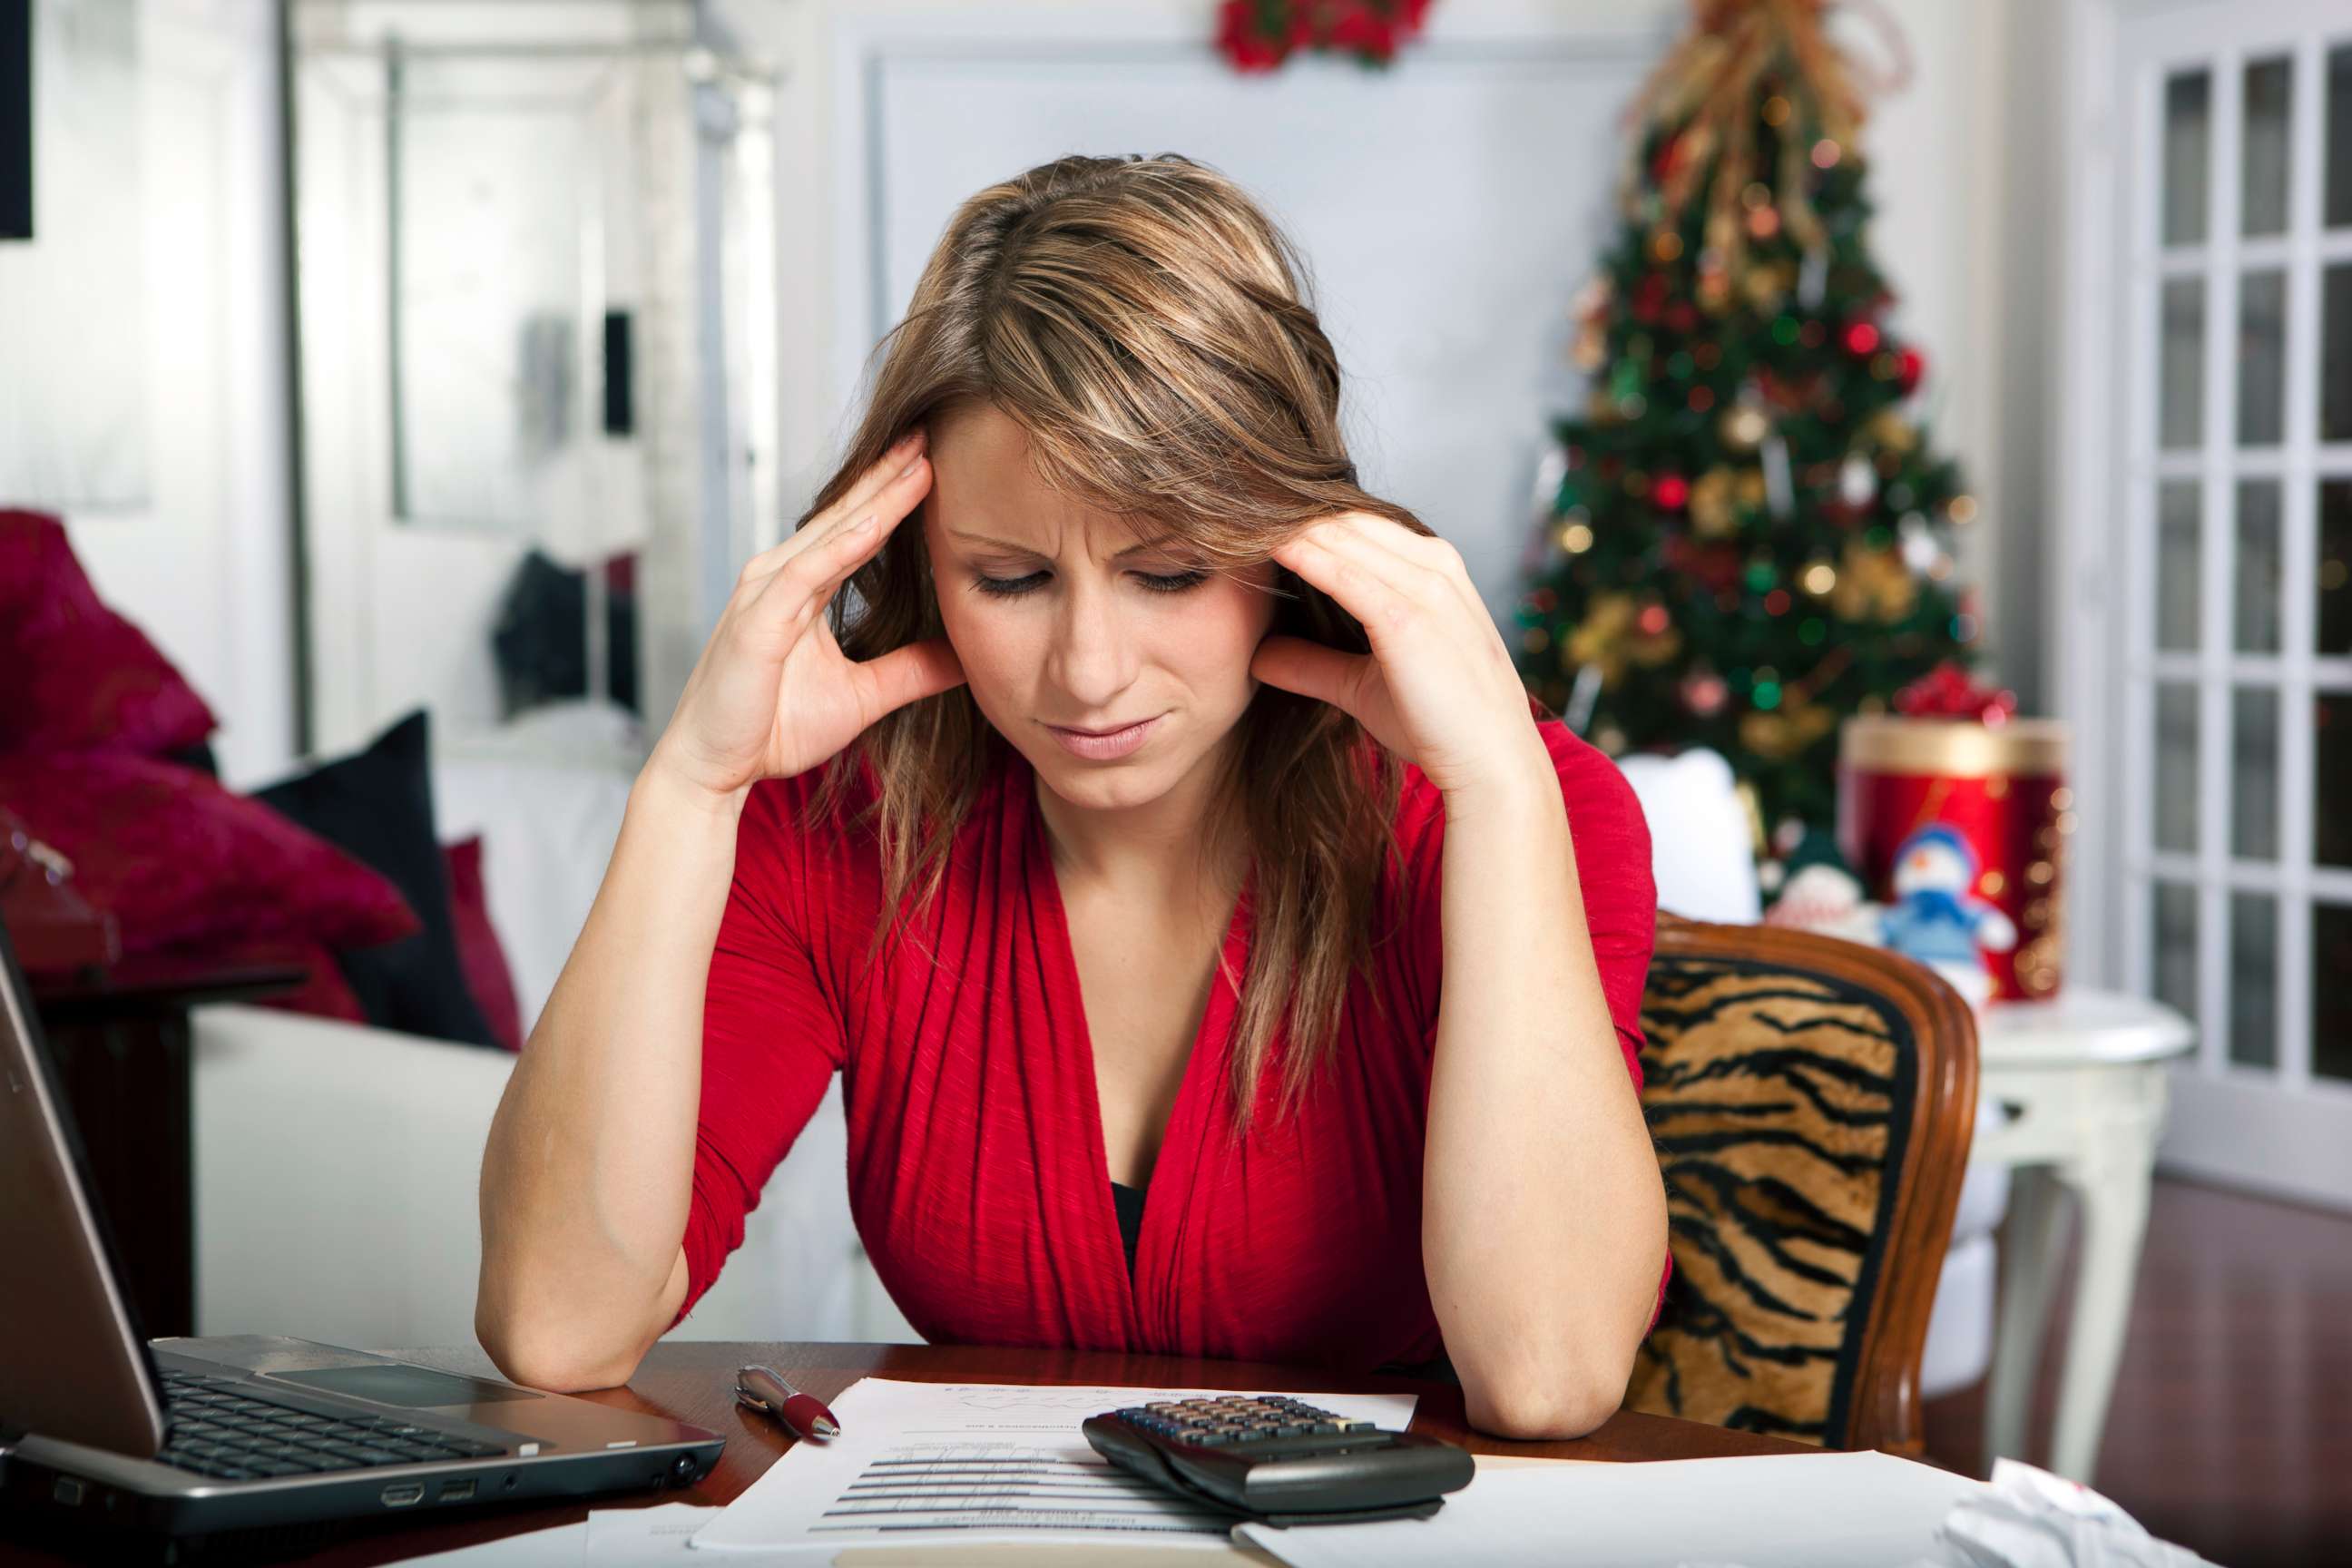 PHOTO: This stock photo depicts a woman who is stressed during the holiday season.